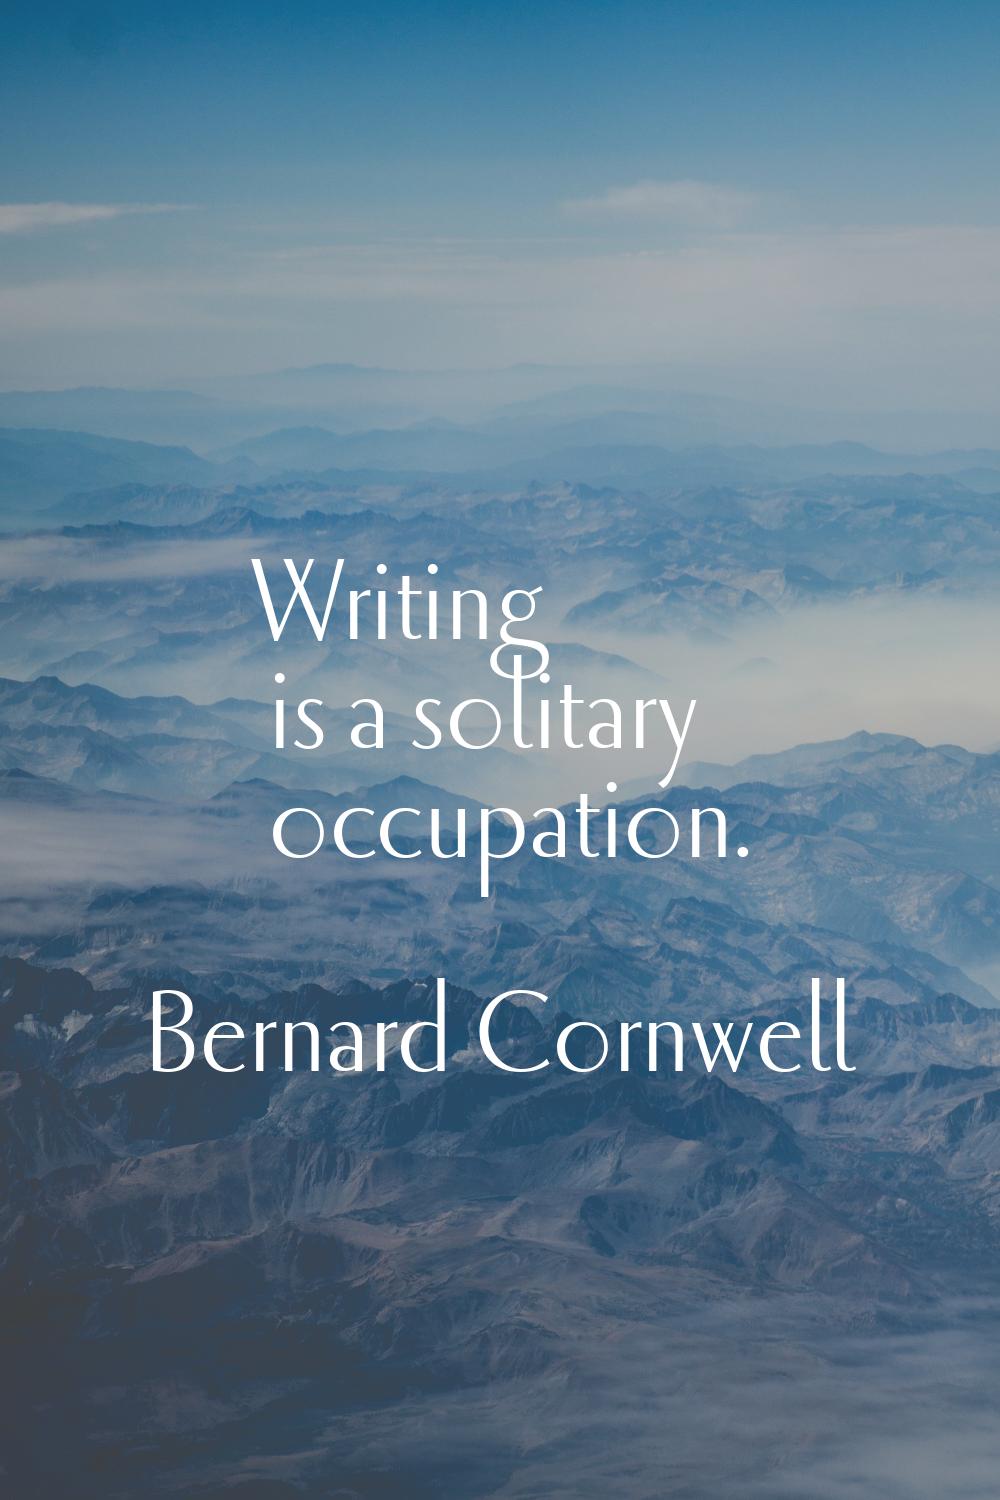 Writing is a solitary occupation.